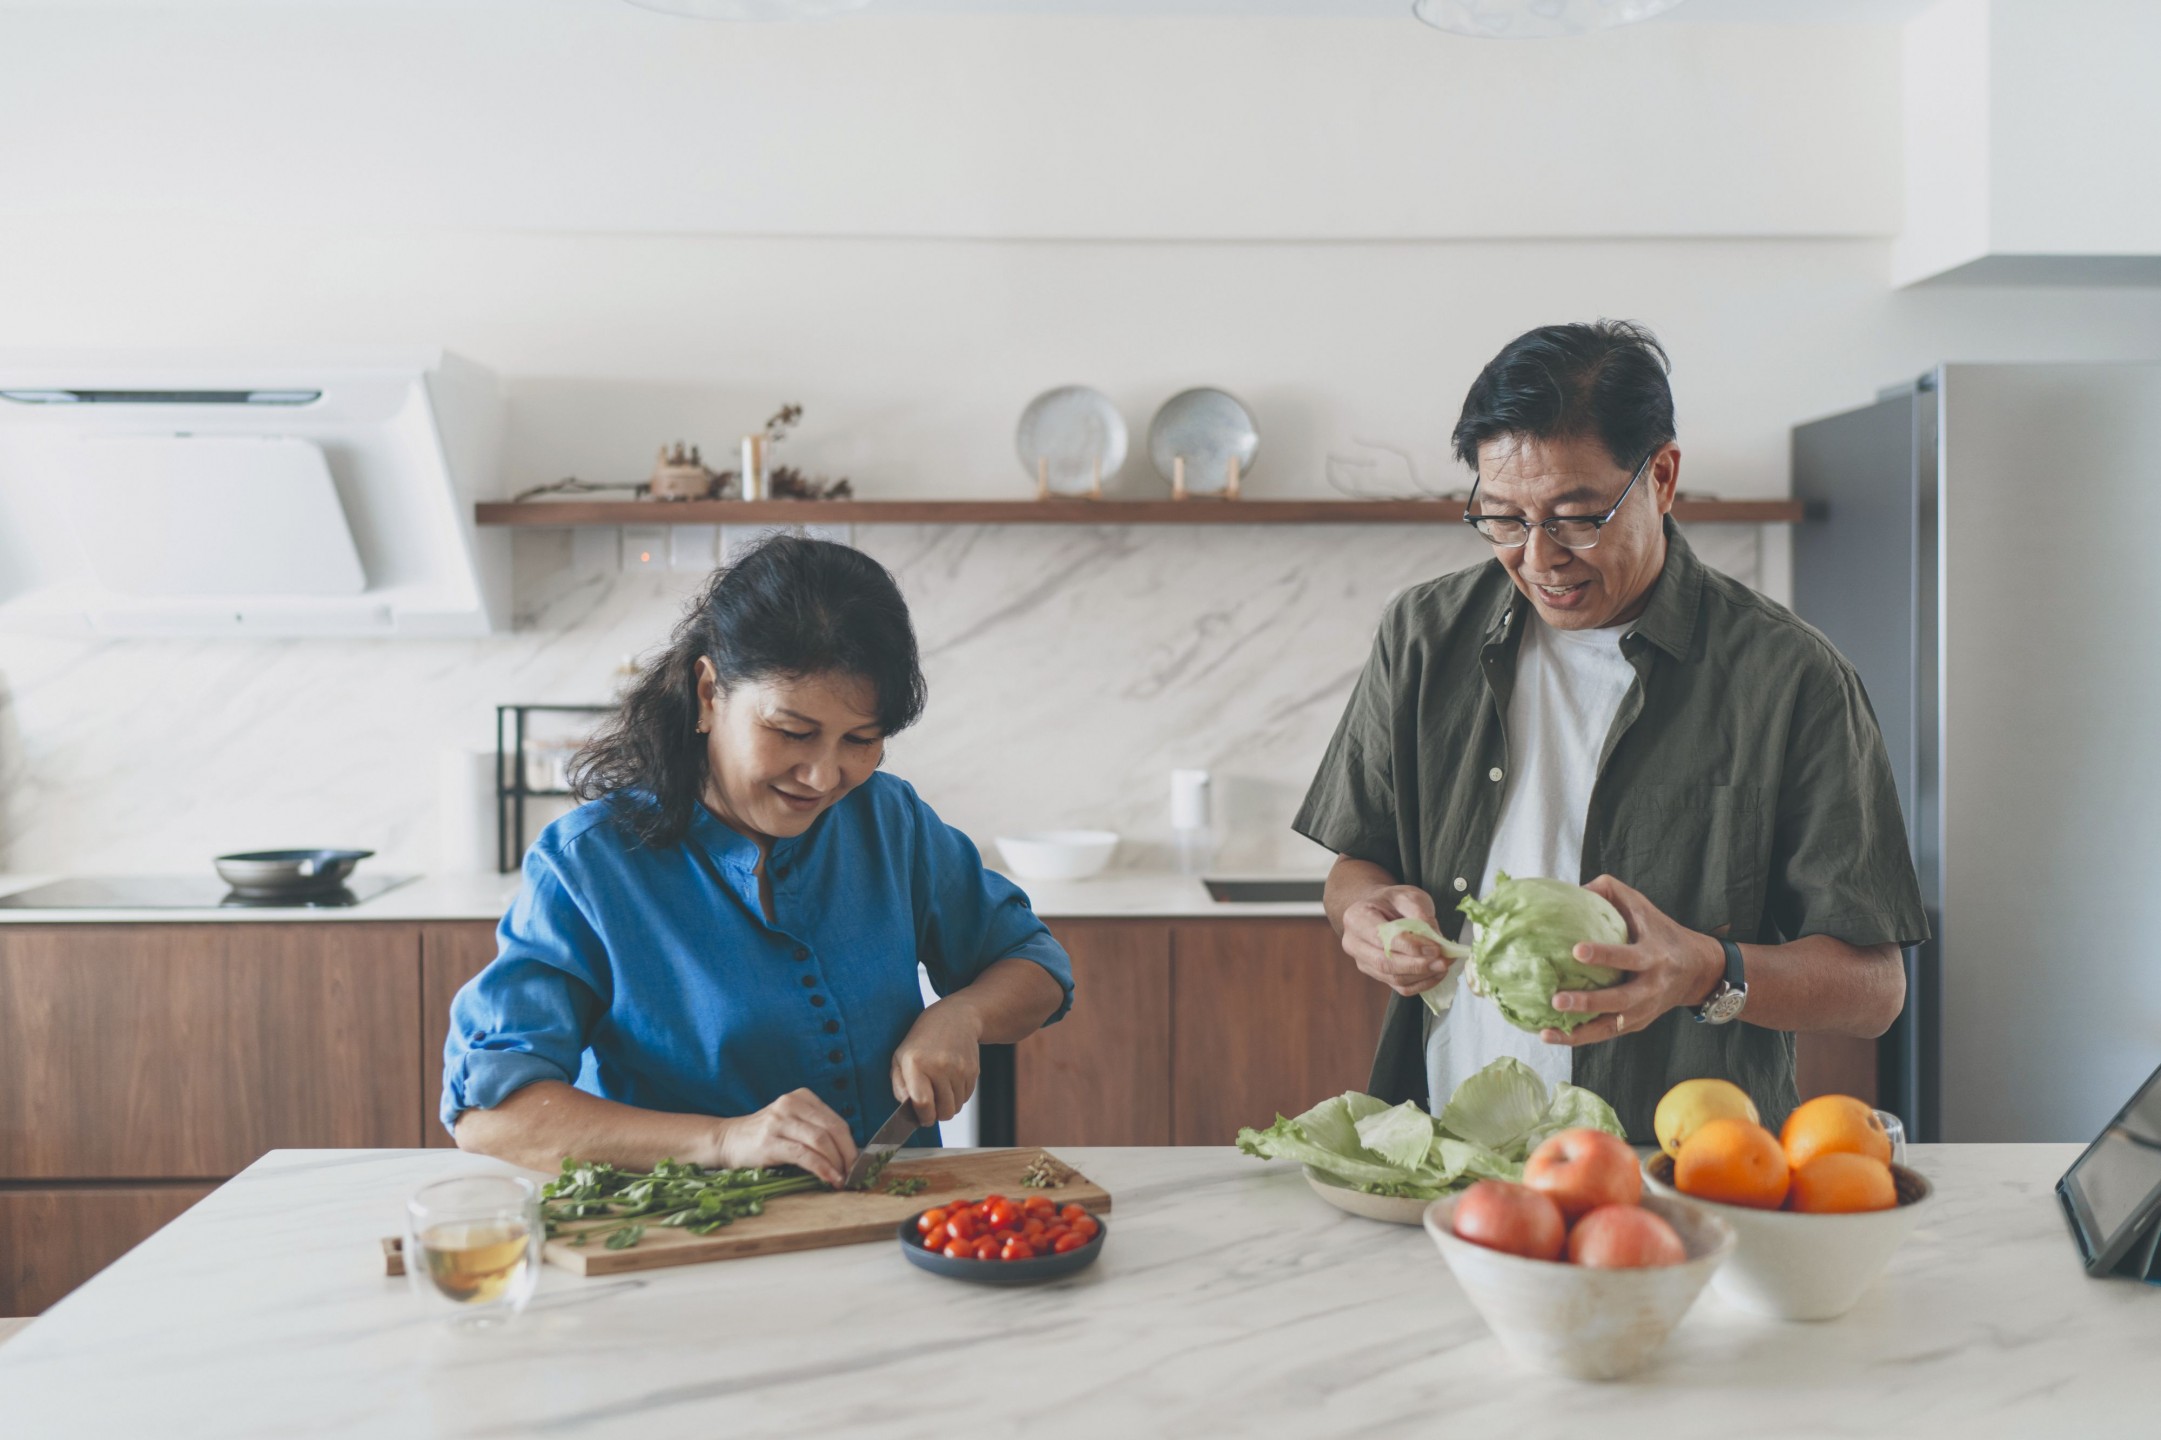 , Hosting with care: How to make your dinner guests feel at home